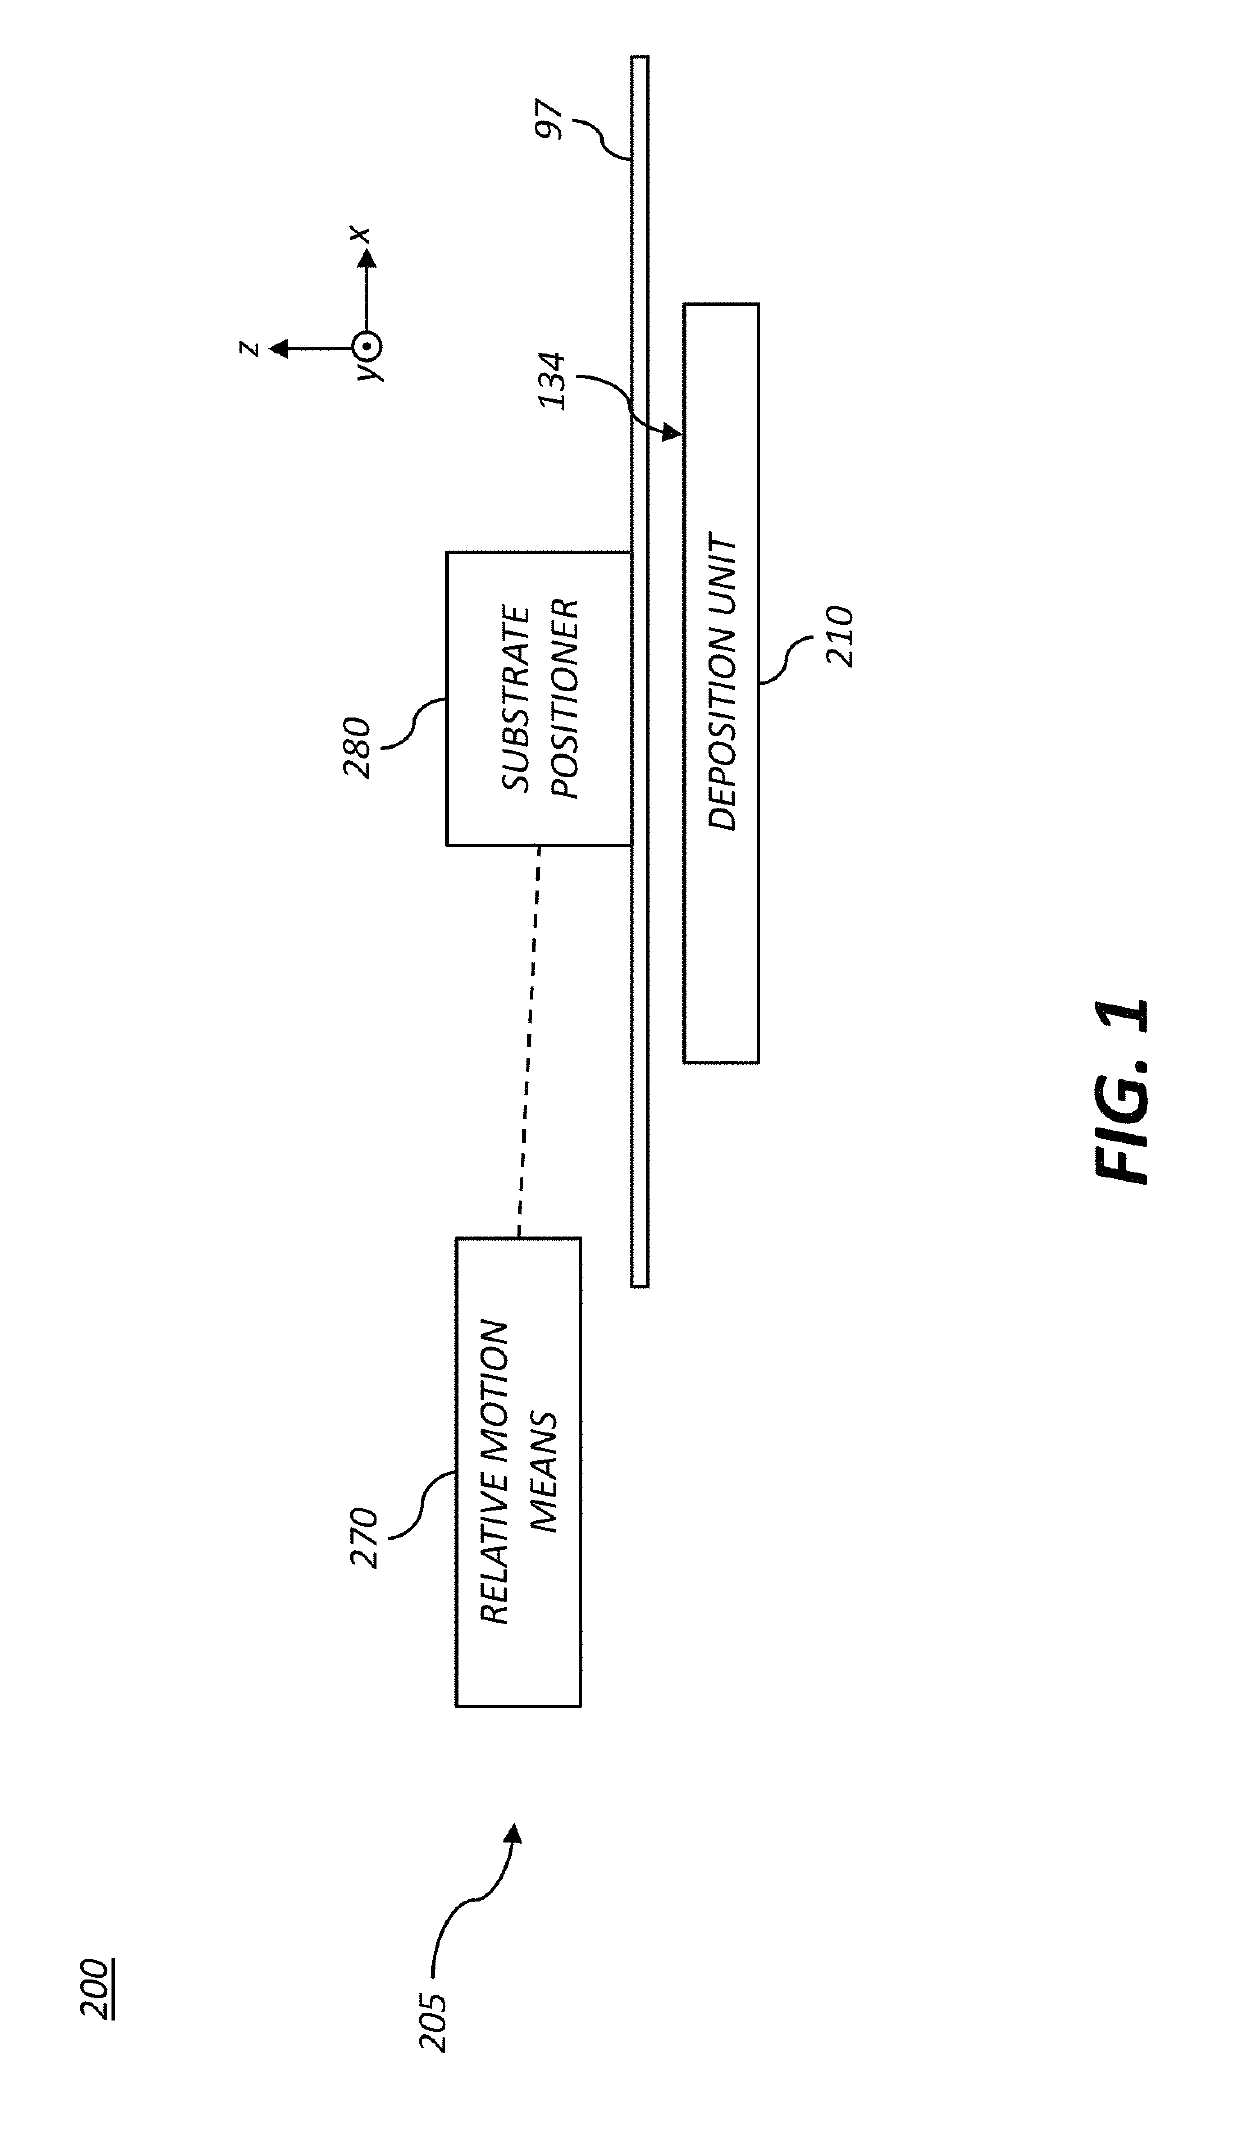 Deposition system with repeating motion profile